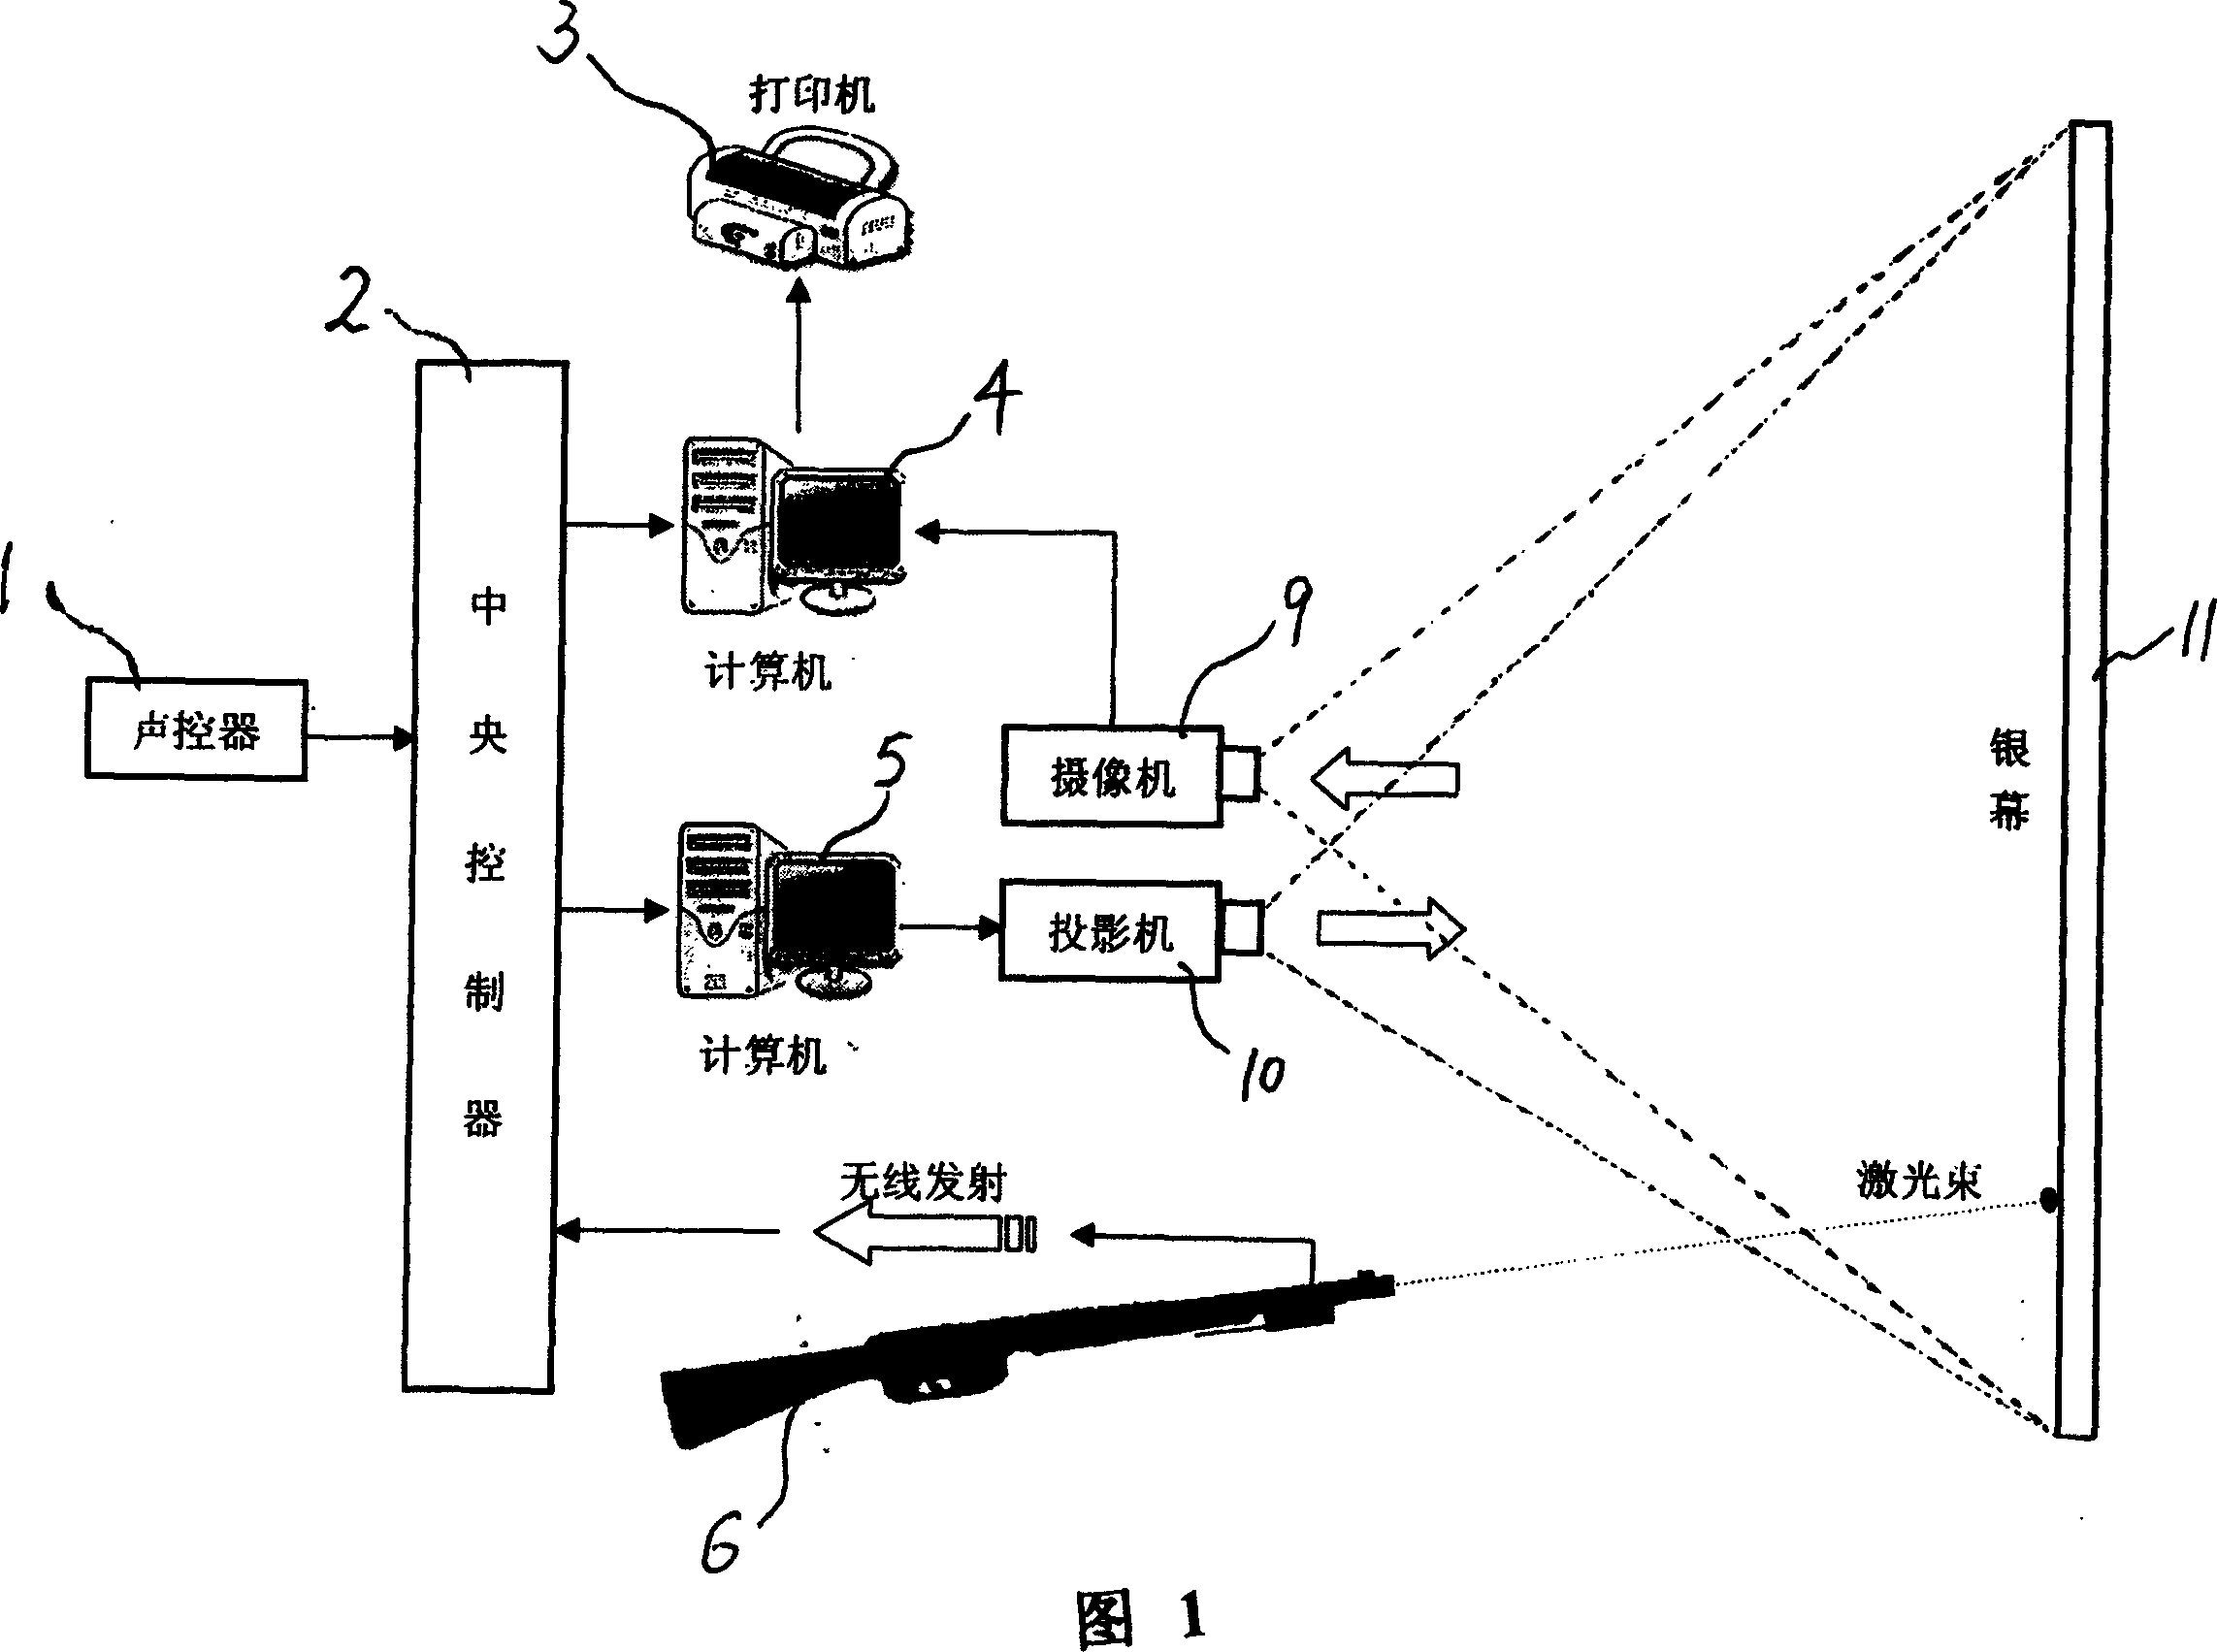 Computer-aided flying saucer shooting training system